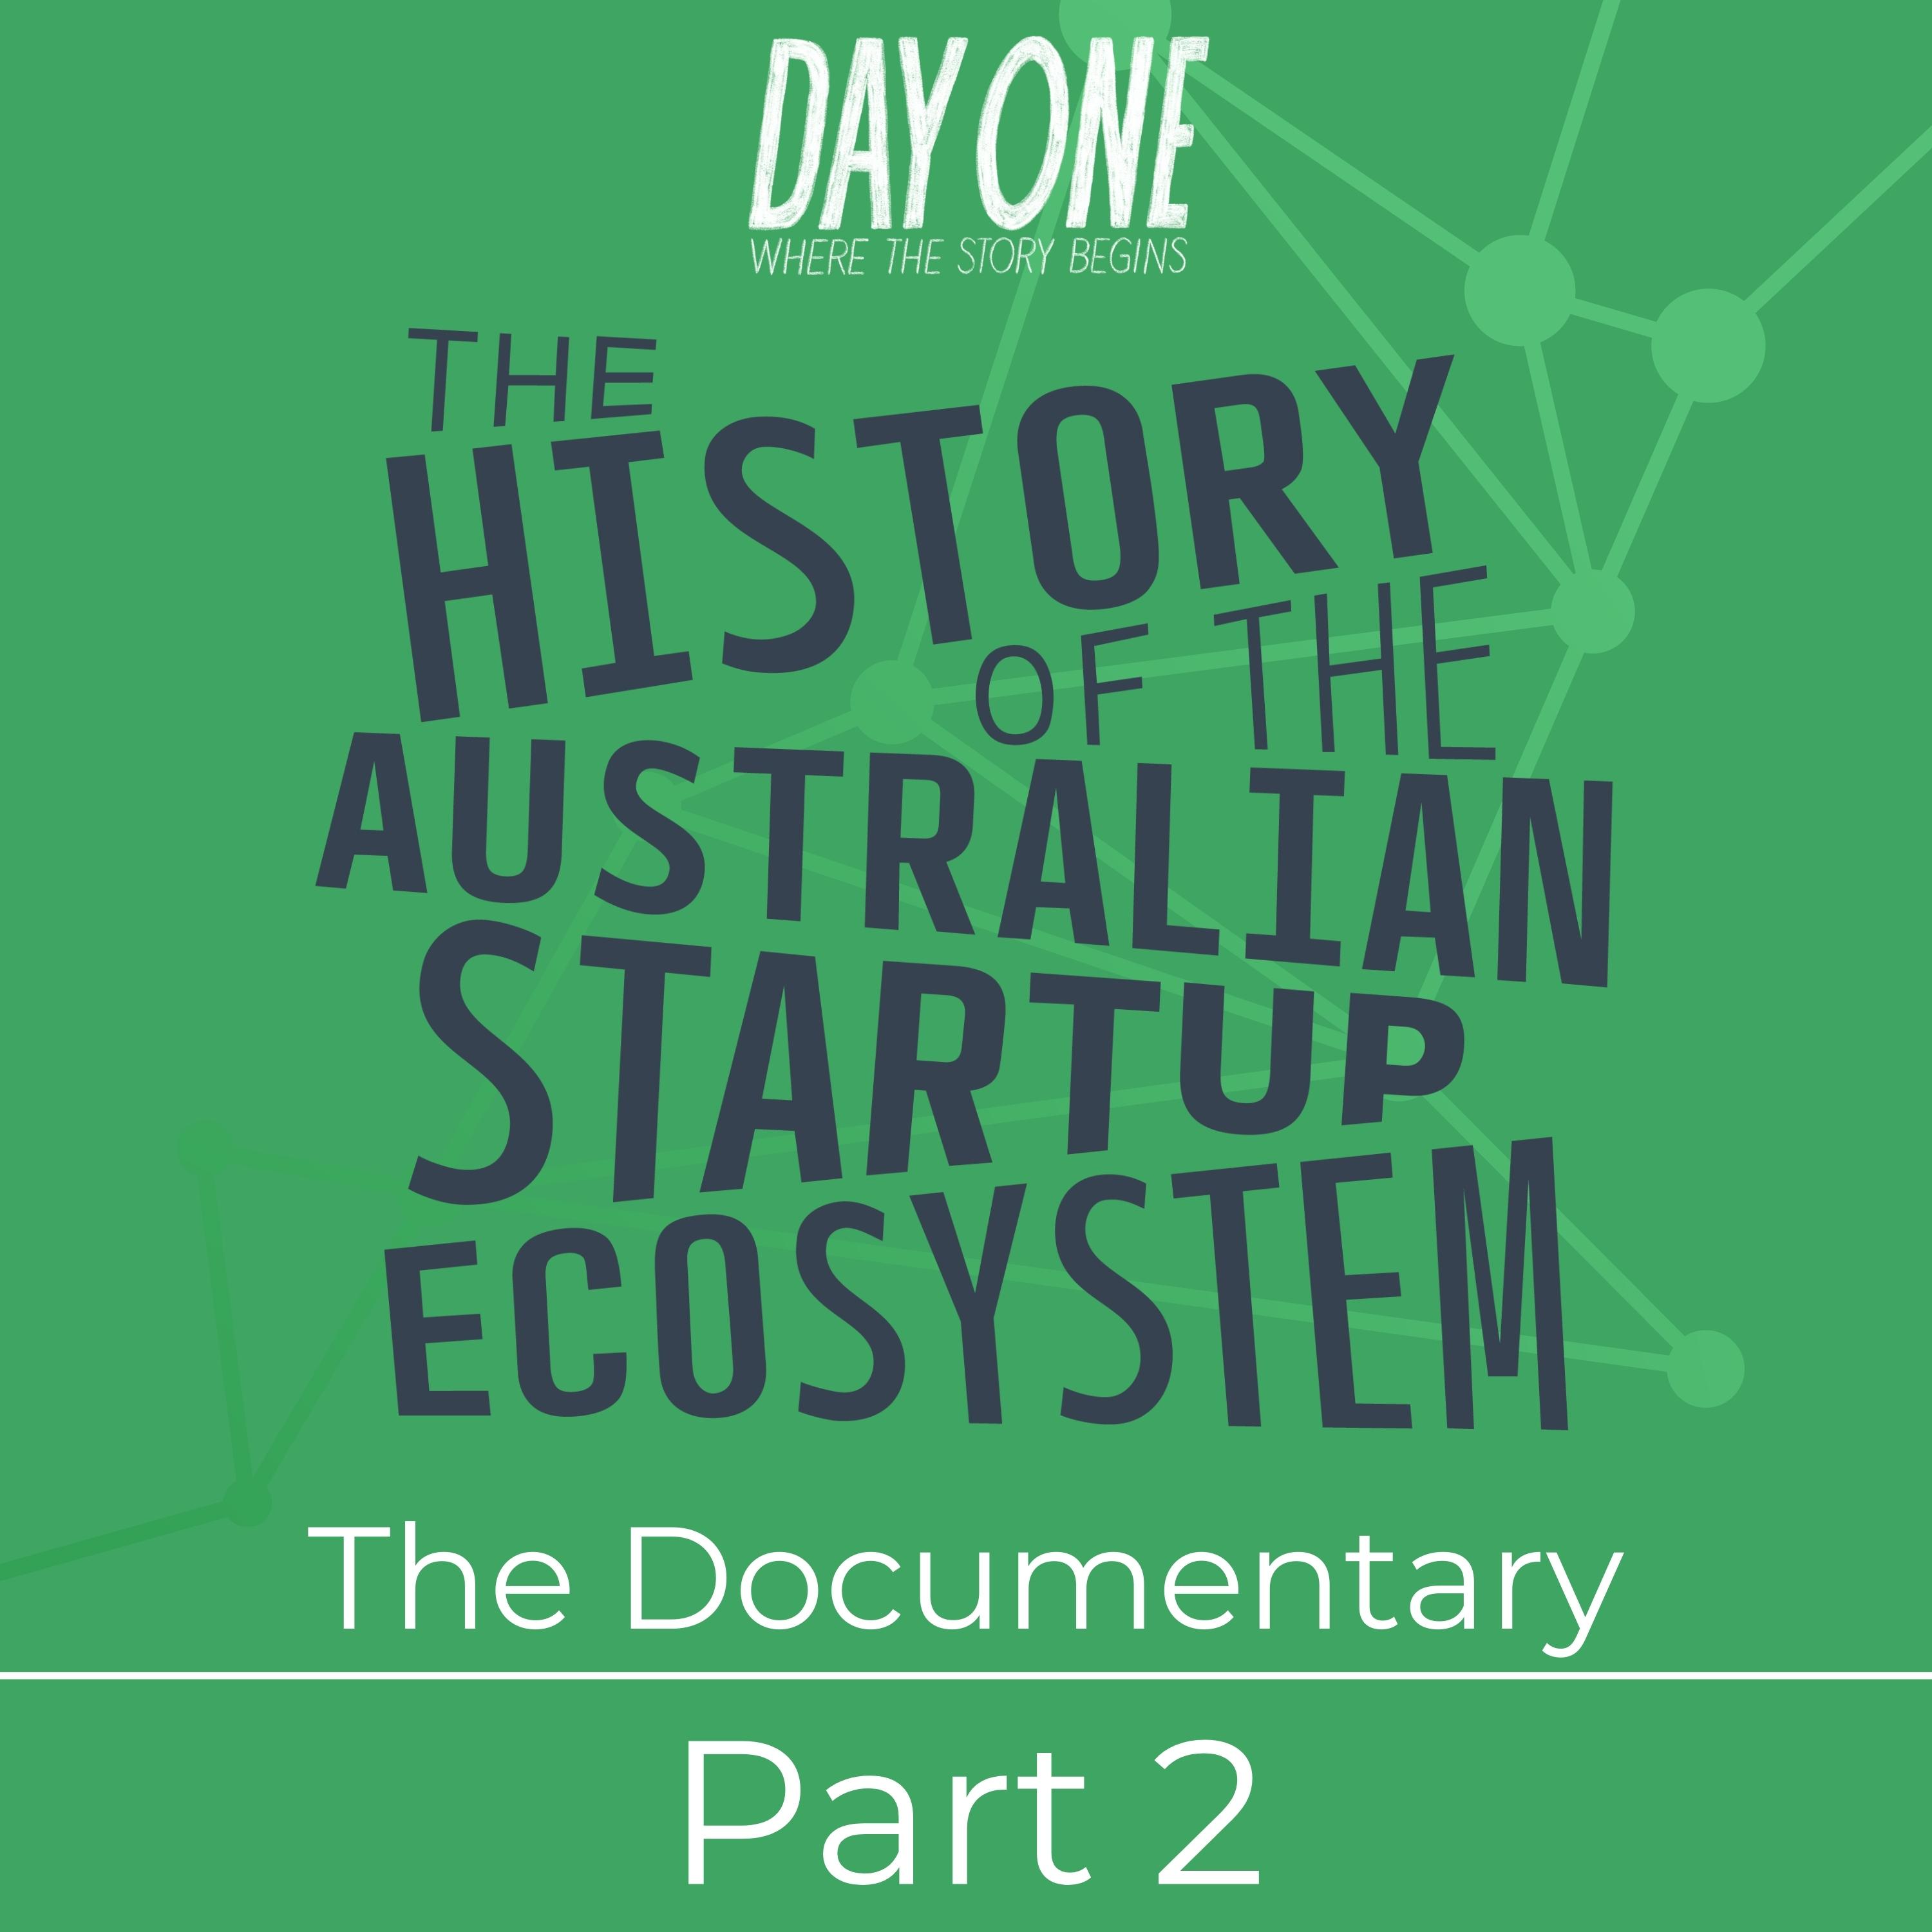 The Documentary: Part 2 - The History of the Australian Startup Ecosystem: Documentary